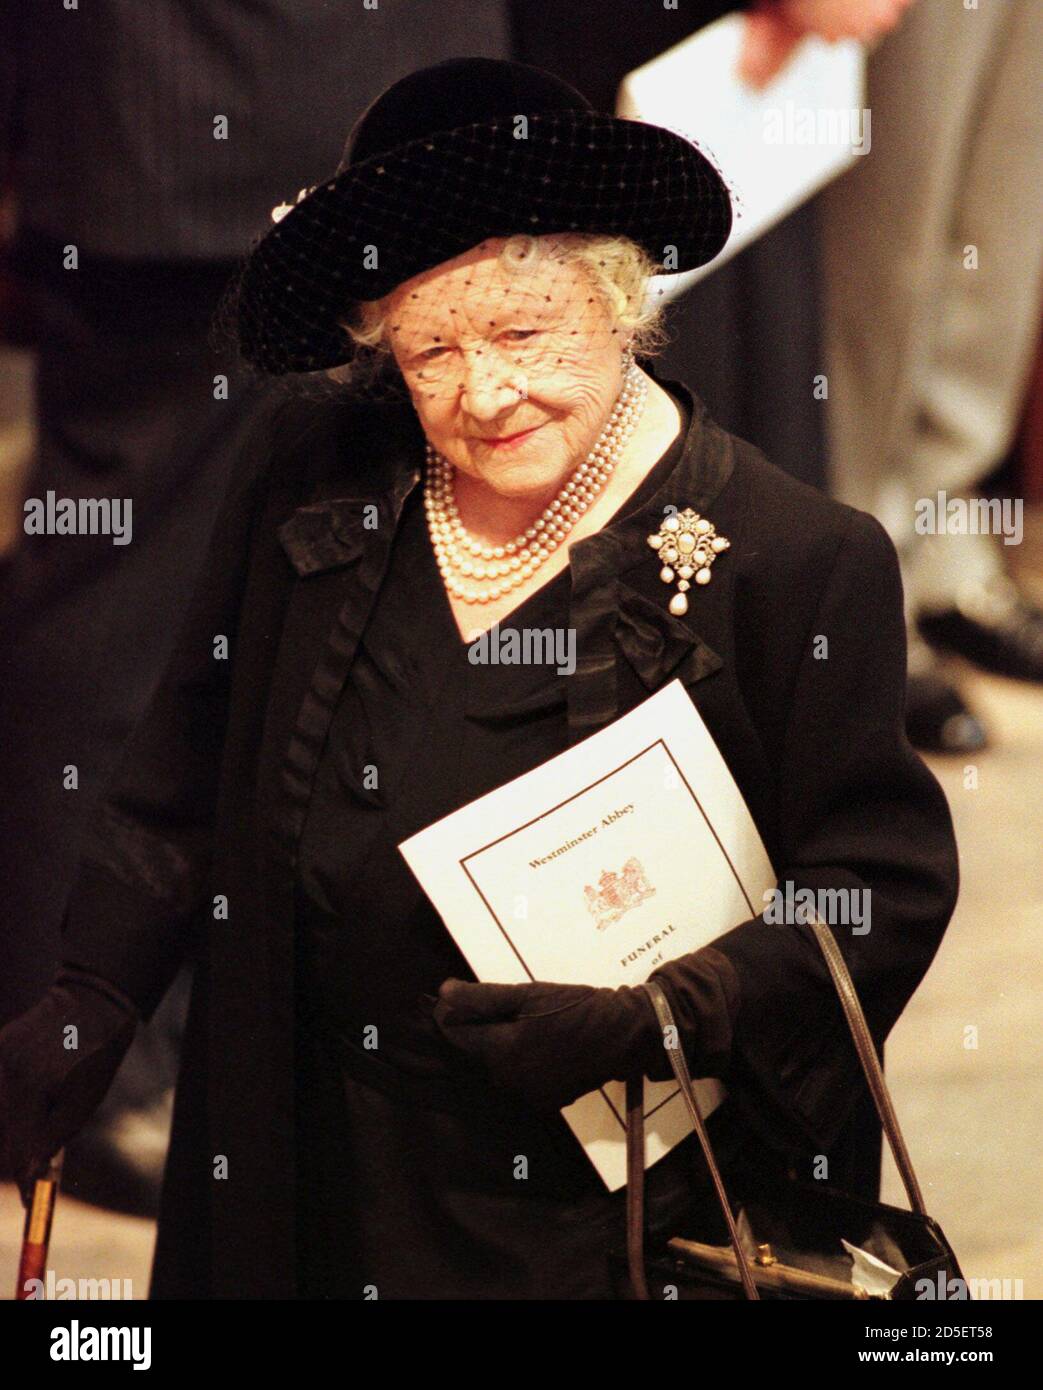 Princess Diana Funeral Service Westminster High Resolution Stock Photography And Images Alamy